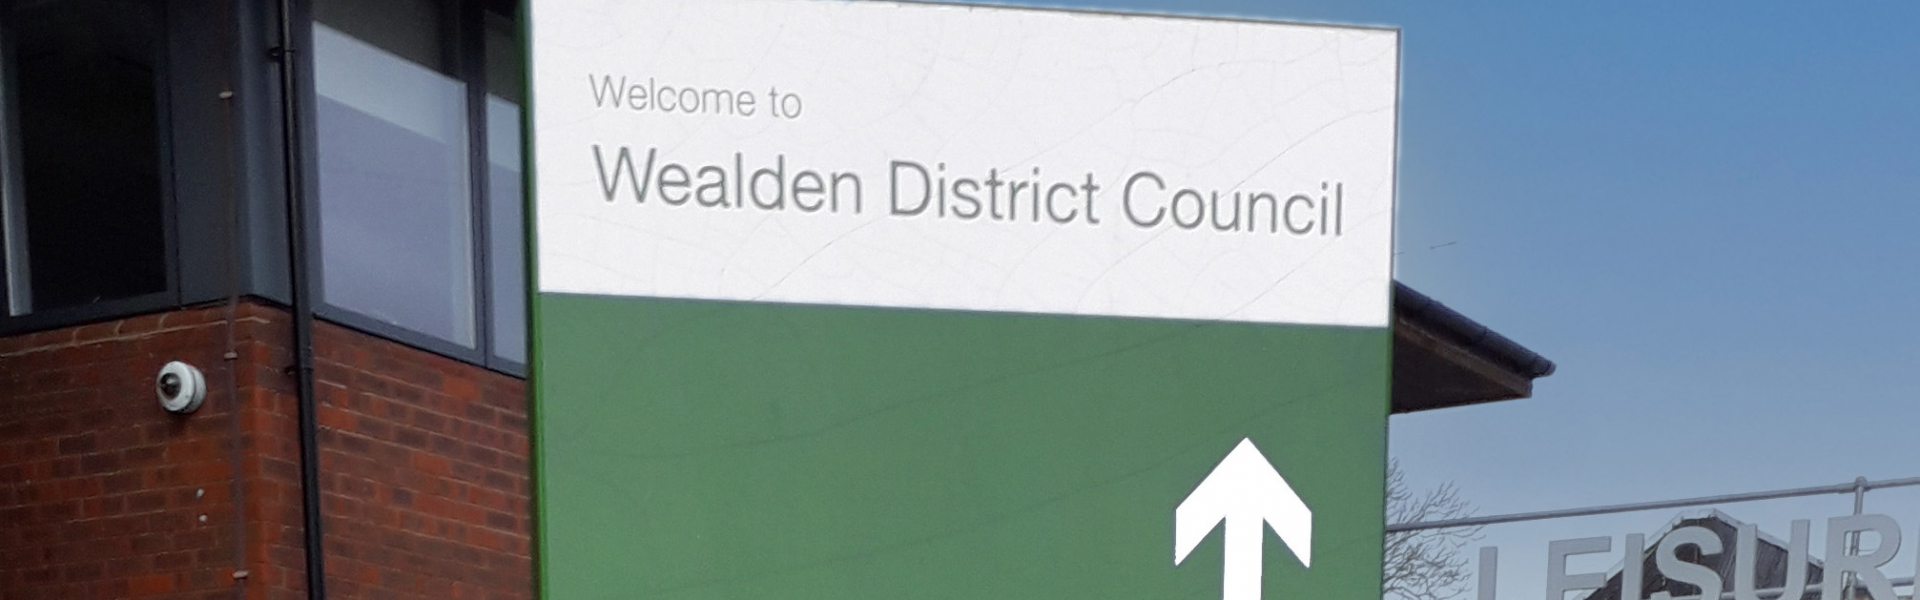 https://www.wealdenconservatives.com/news/conservatives-leave-meeting-accusing-council-gagging-them-over-crucial-local-plan-vote